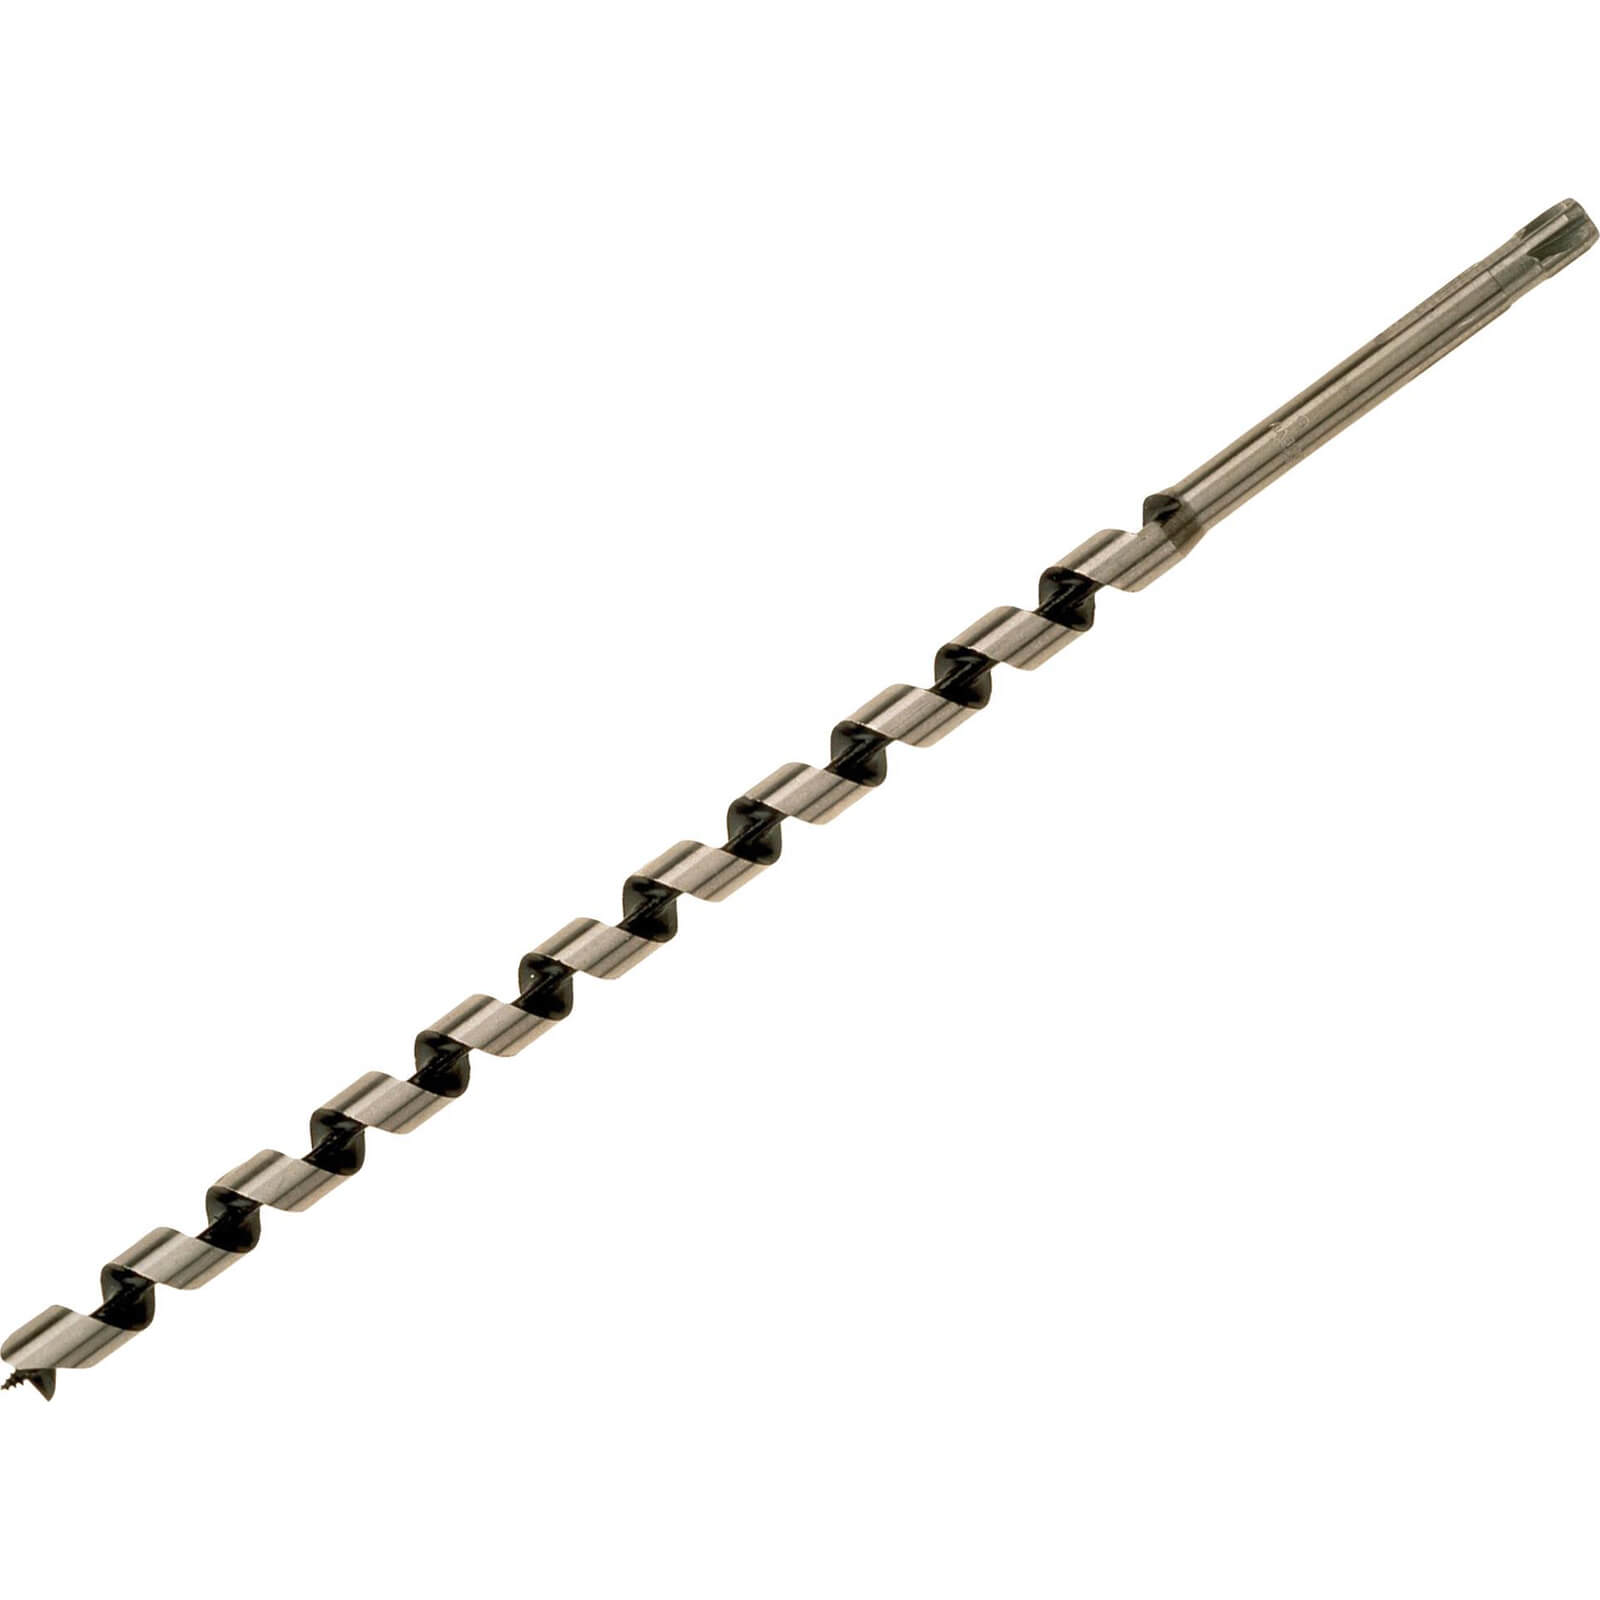 Photo of Bahco 9627 Series Long Combination Auger Drill Bit 22mm 460mm